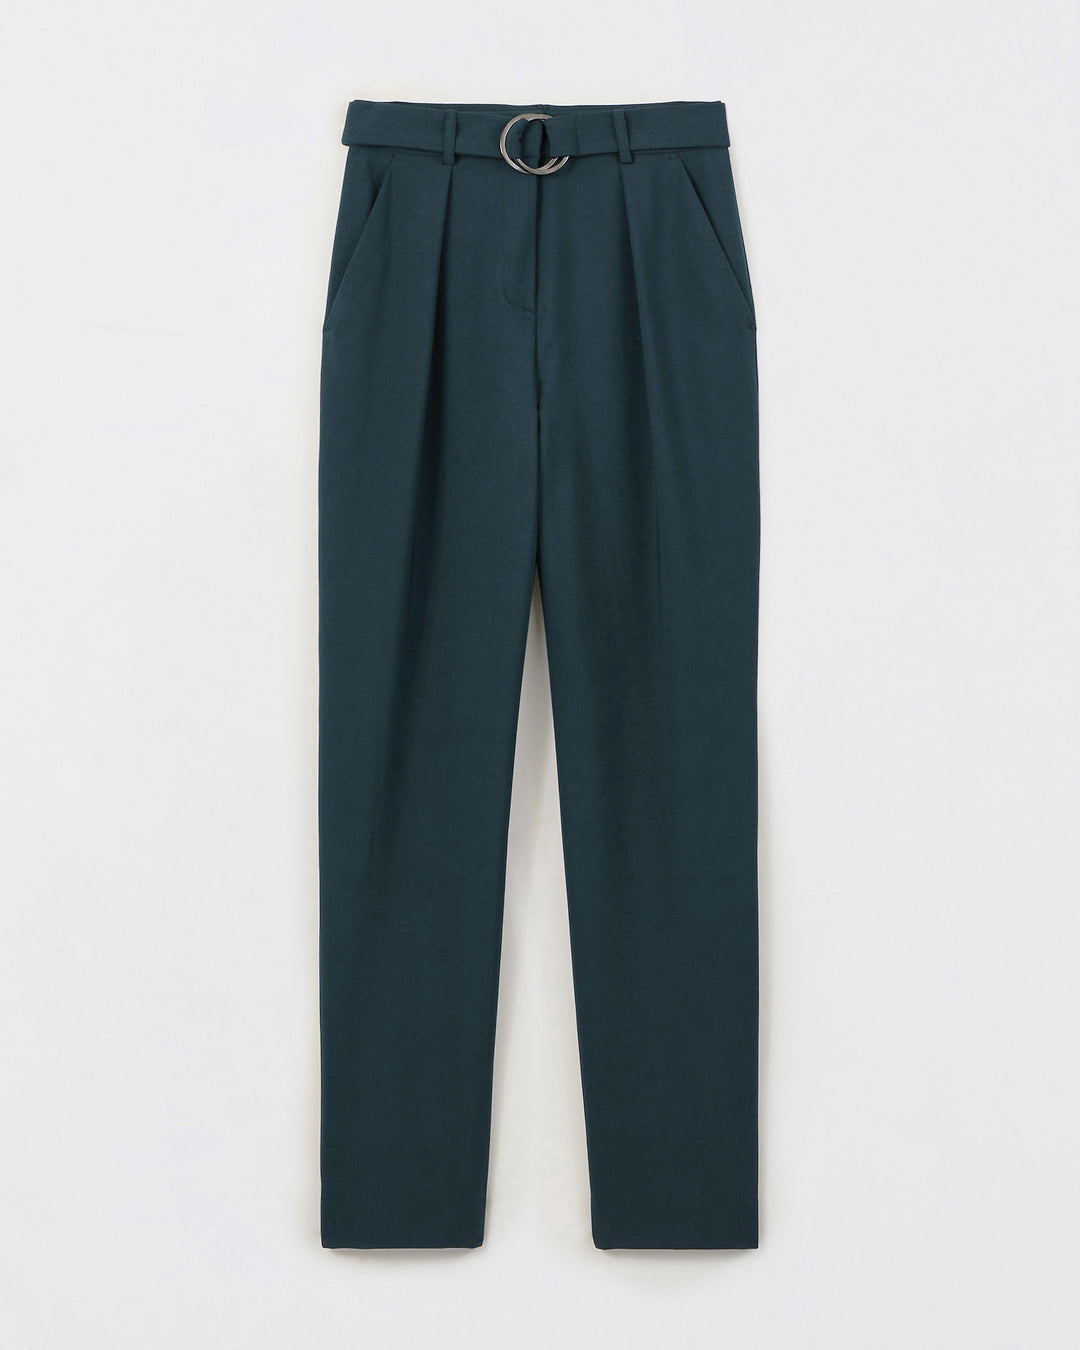 Tailor-trousers-green-cut-7-8th-waist-high-pleated-under-the-two-pockets-a-l-italian-belt-assorted-tone-on-tone-17H10-tailors-for-women-paris-